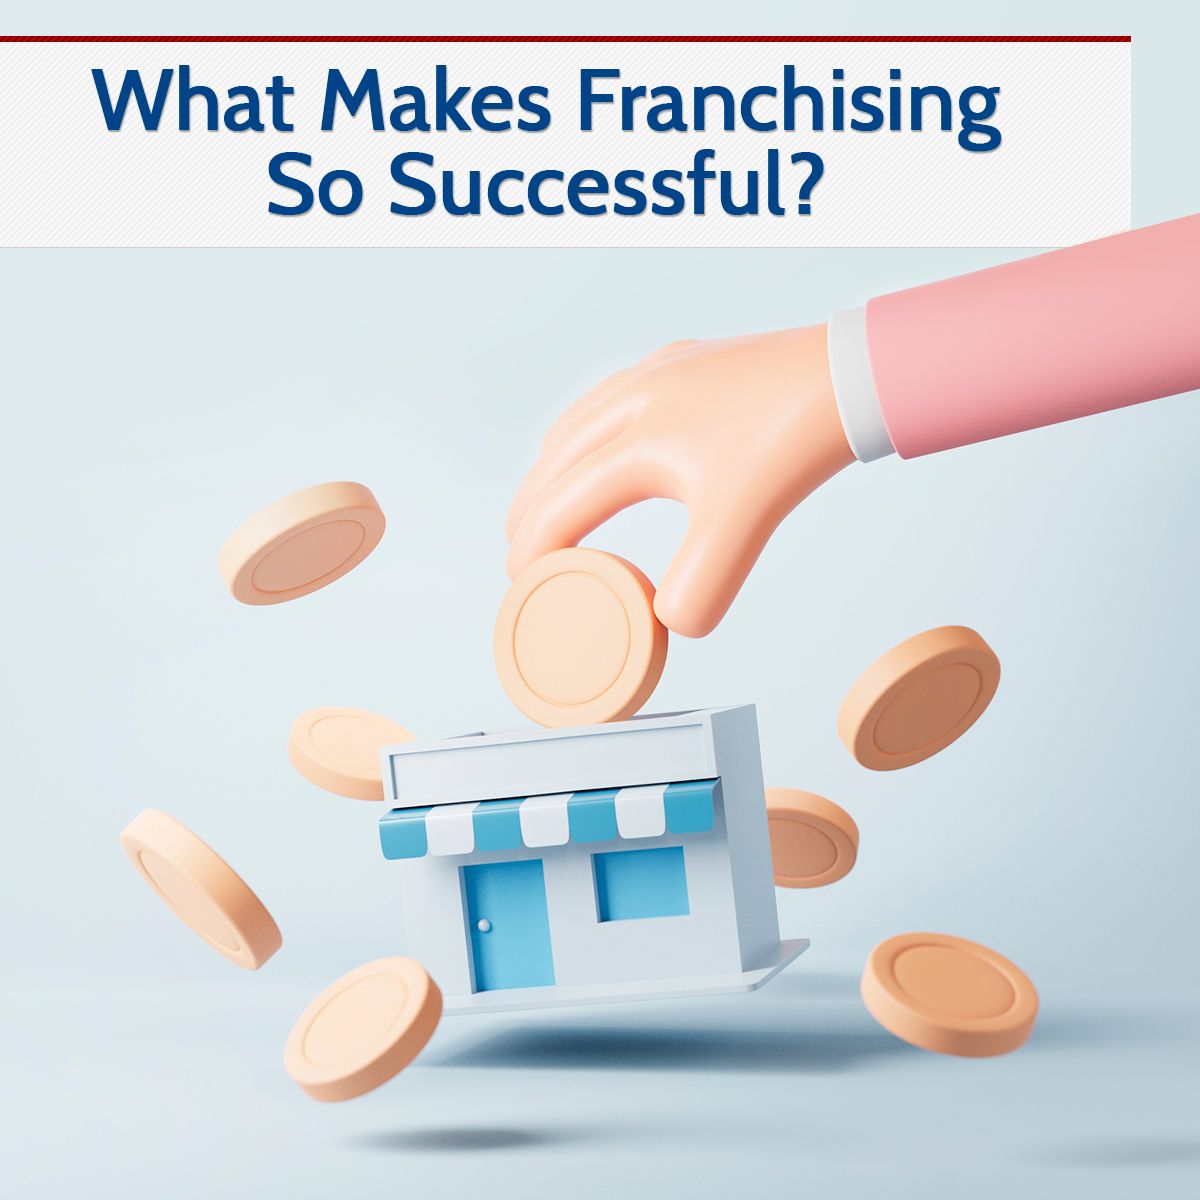 What Makes Franchising So Successful?